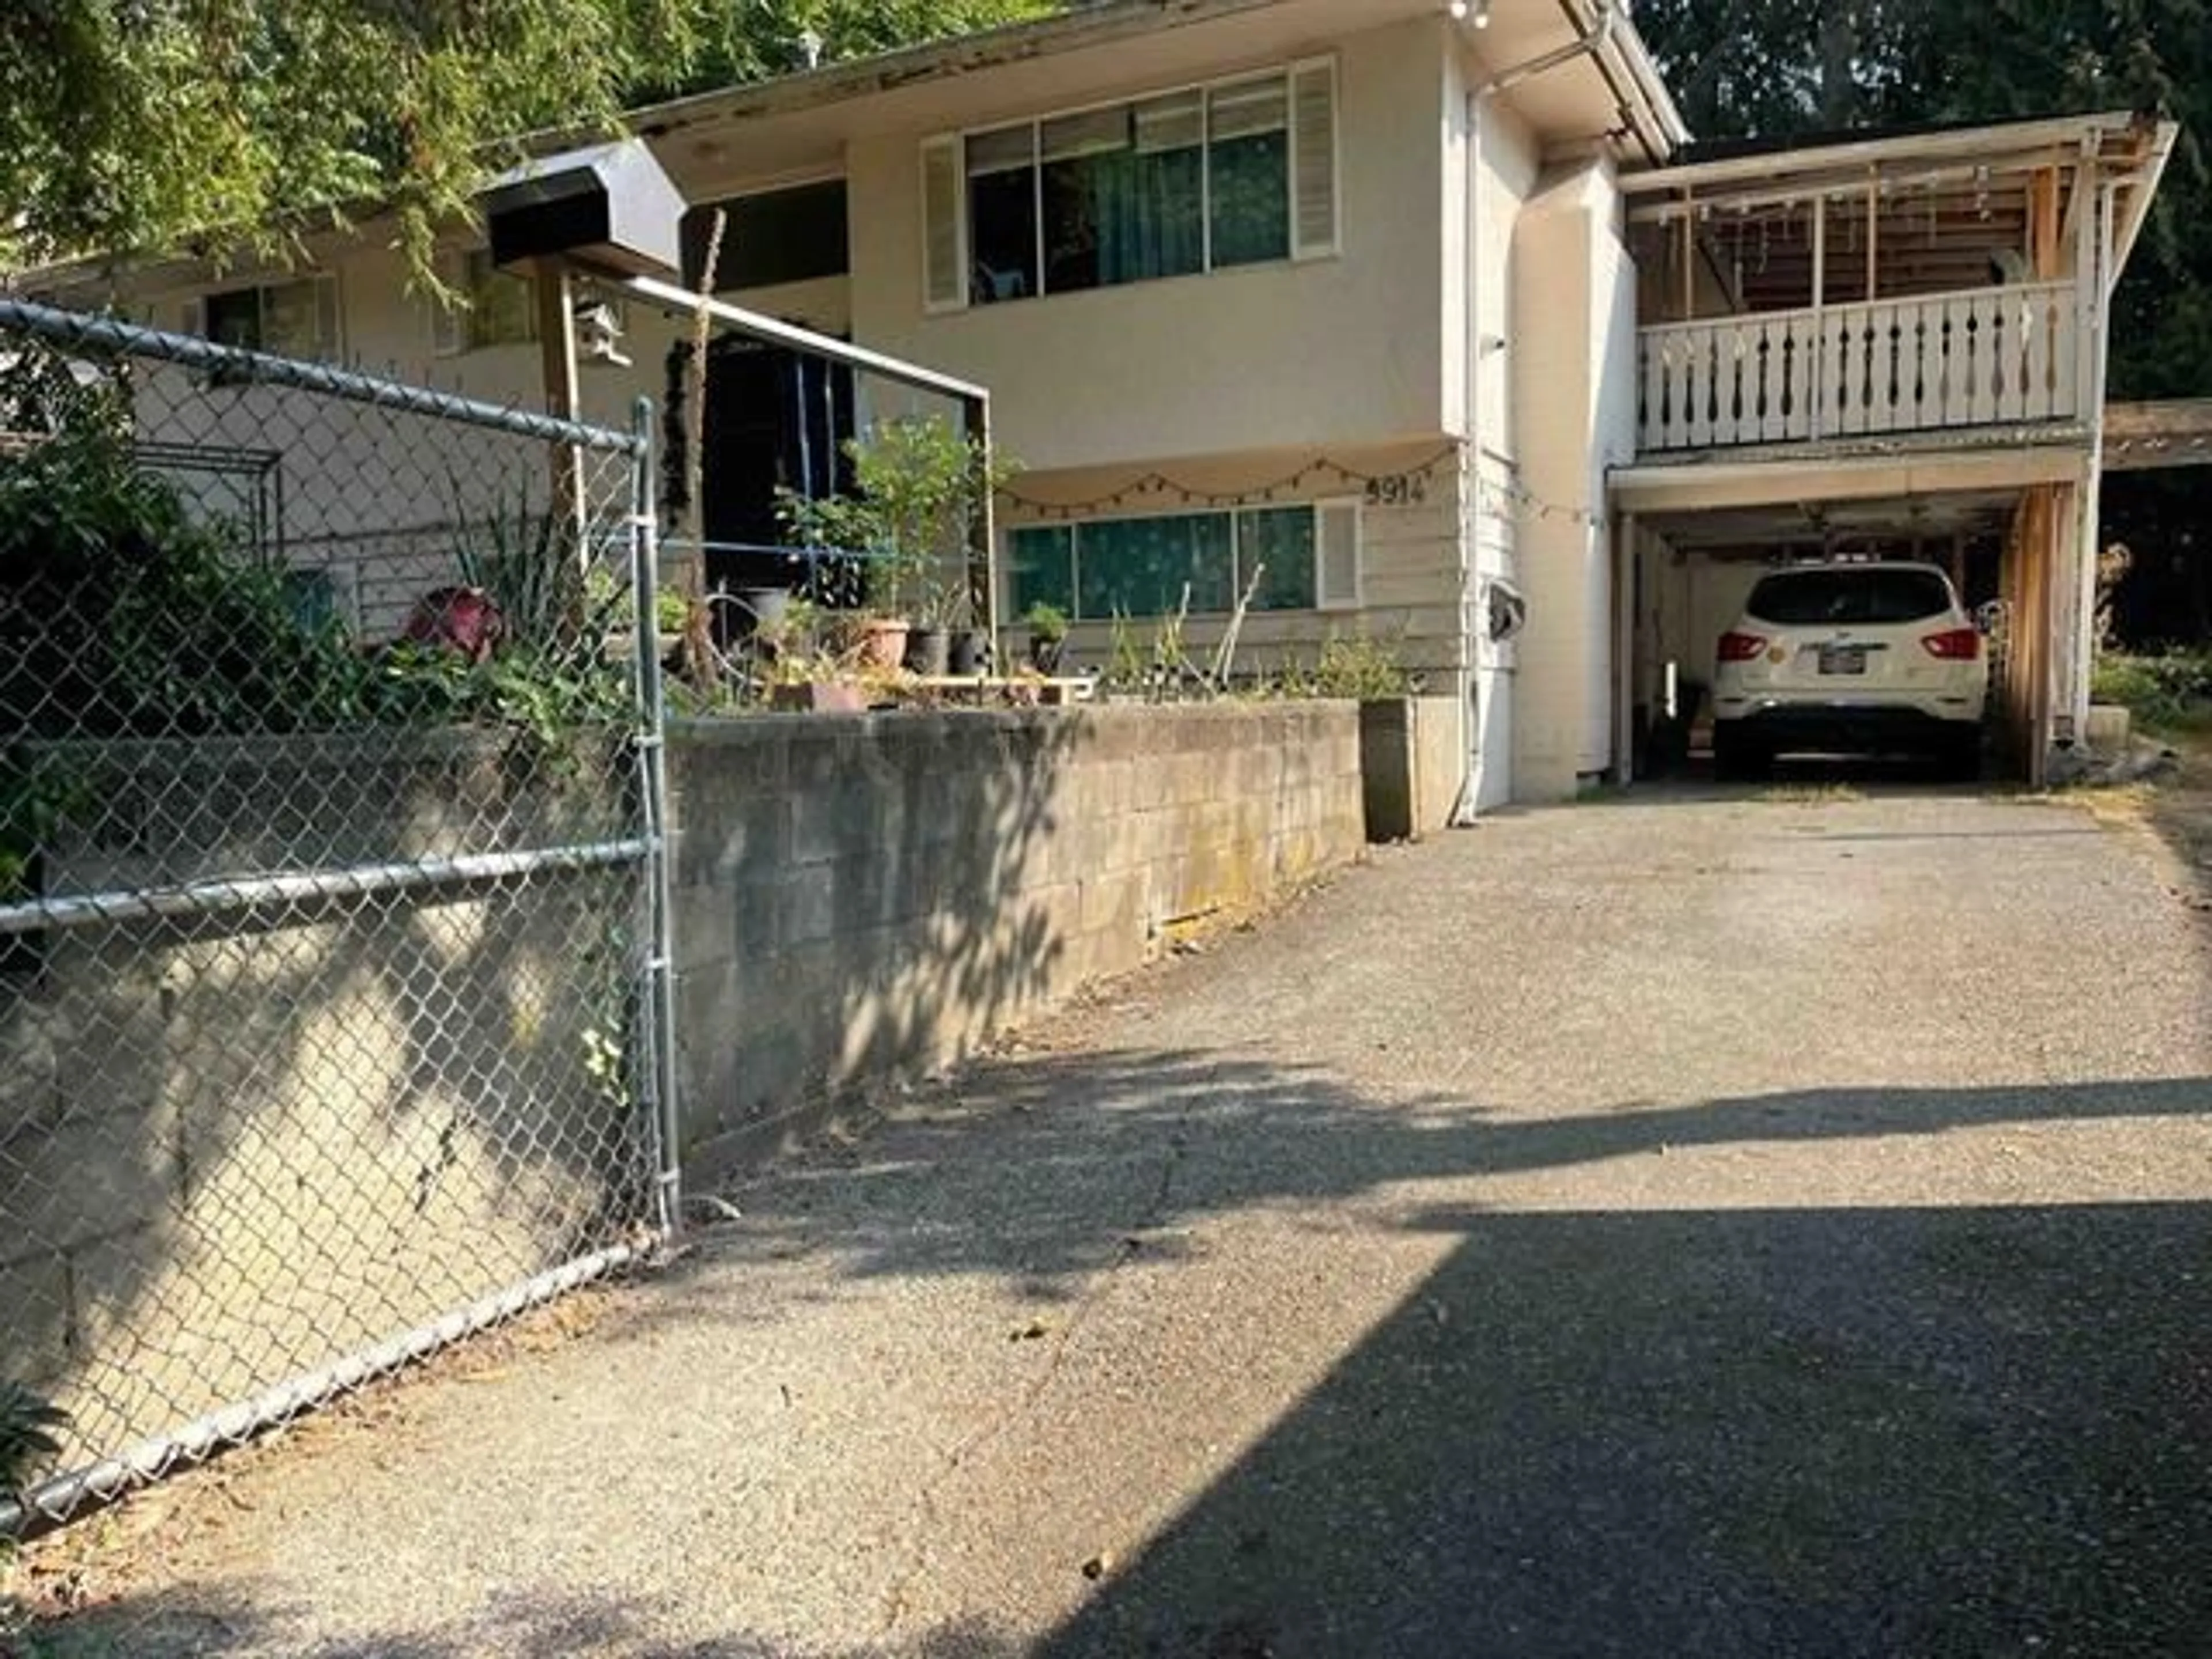 Frontside or backside of a home for 9914 138A STREET, Surrey British Columbia V3T4L1